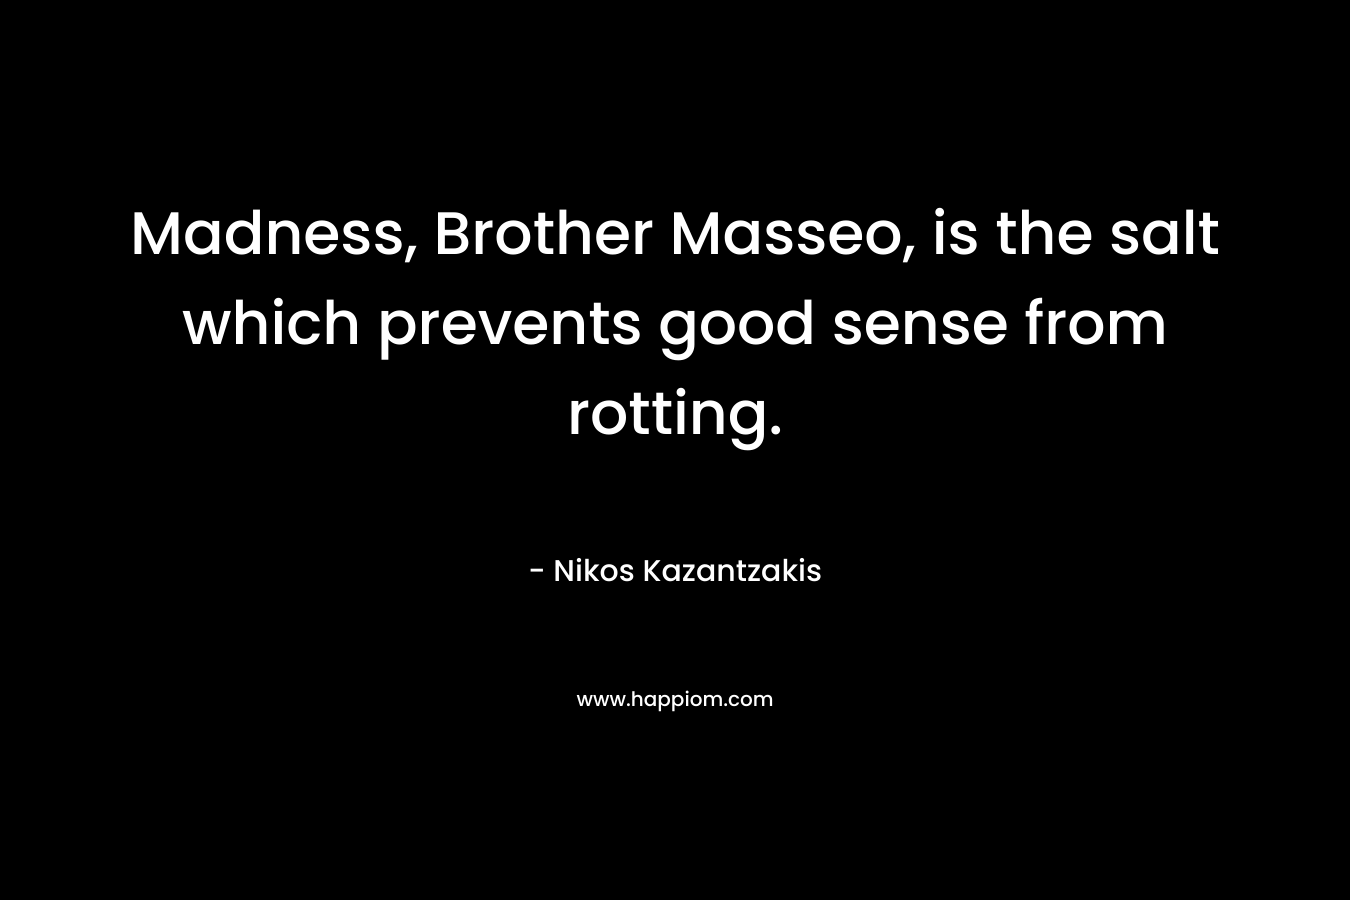 Madness, Brother Masseo, is the salt which prevents good sense from rotting. – Nikos Kazantzakis